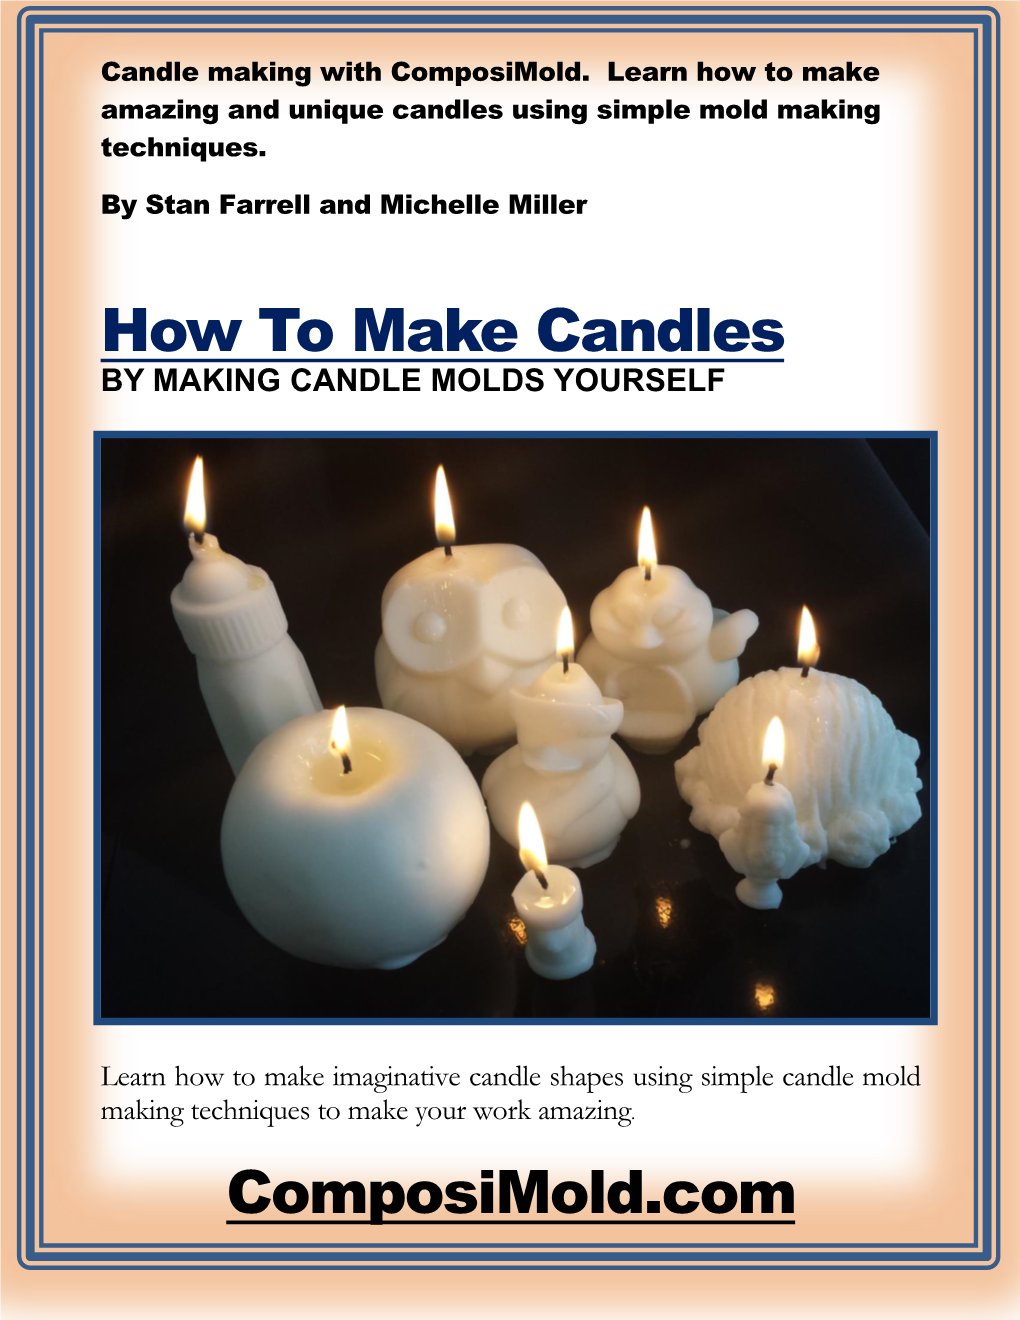 By Making Candle Molds Yourself